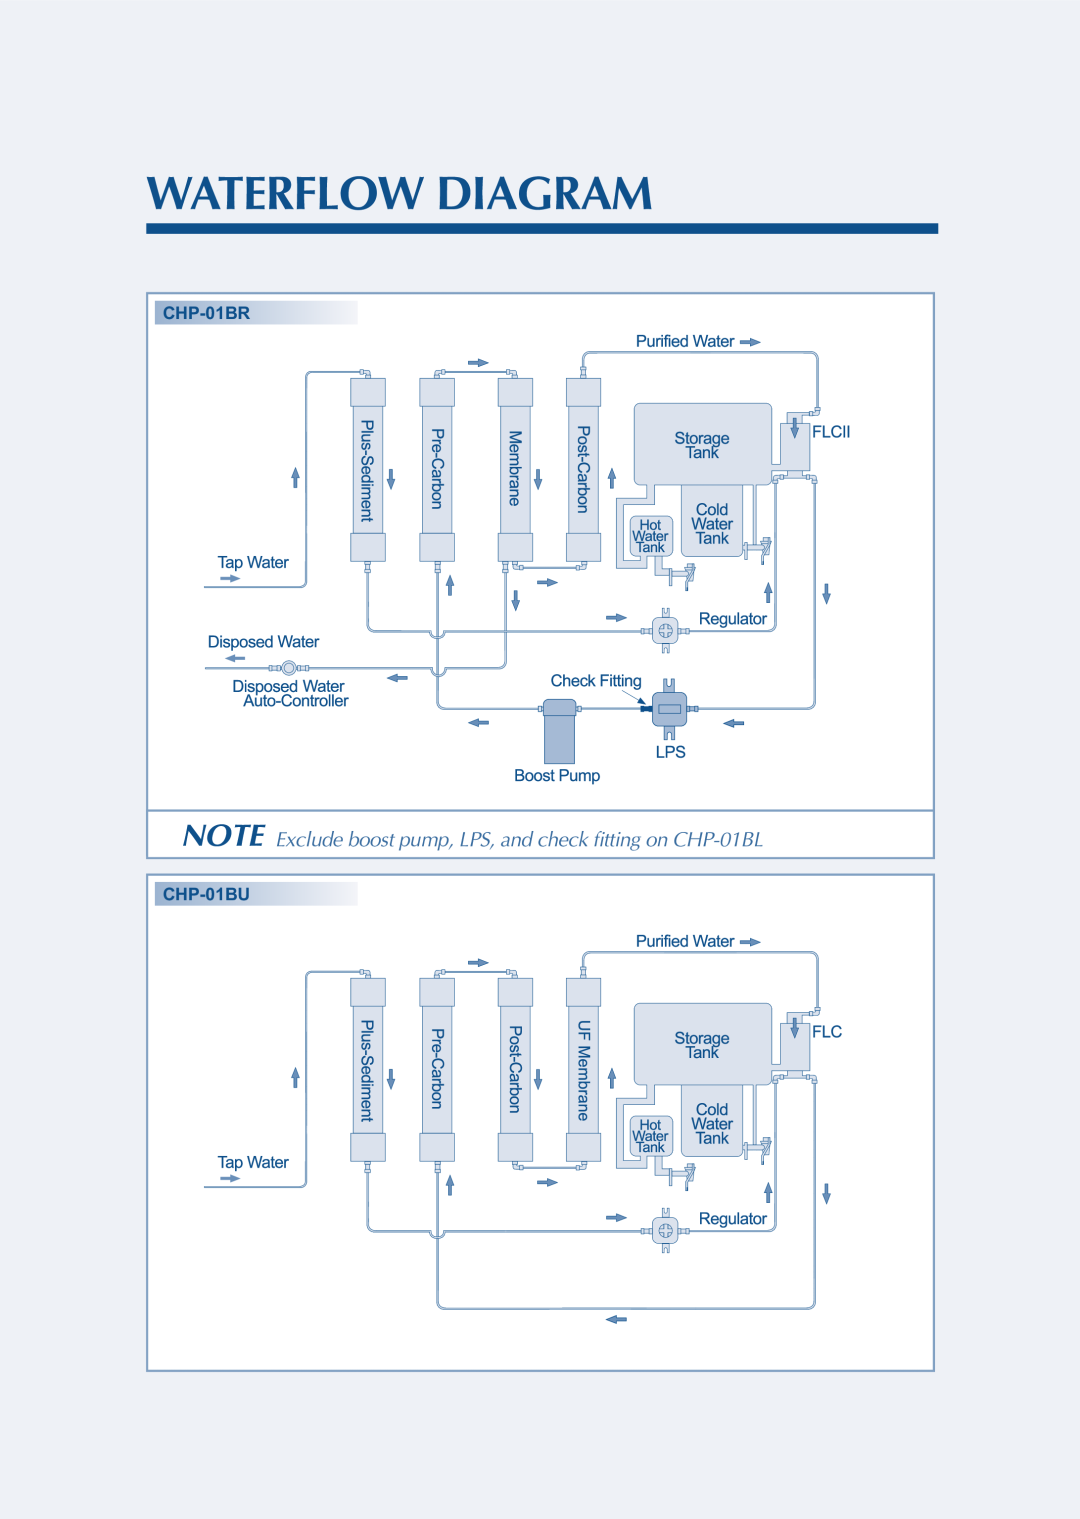 Coway CHP-01BU manual Waterflow Diagram, NOTE Exclude boost pump, LPS, and check fitting on CHP-01BL, CHP-01BR 